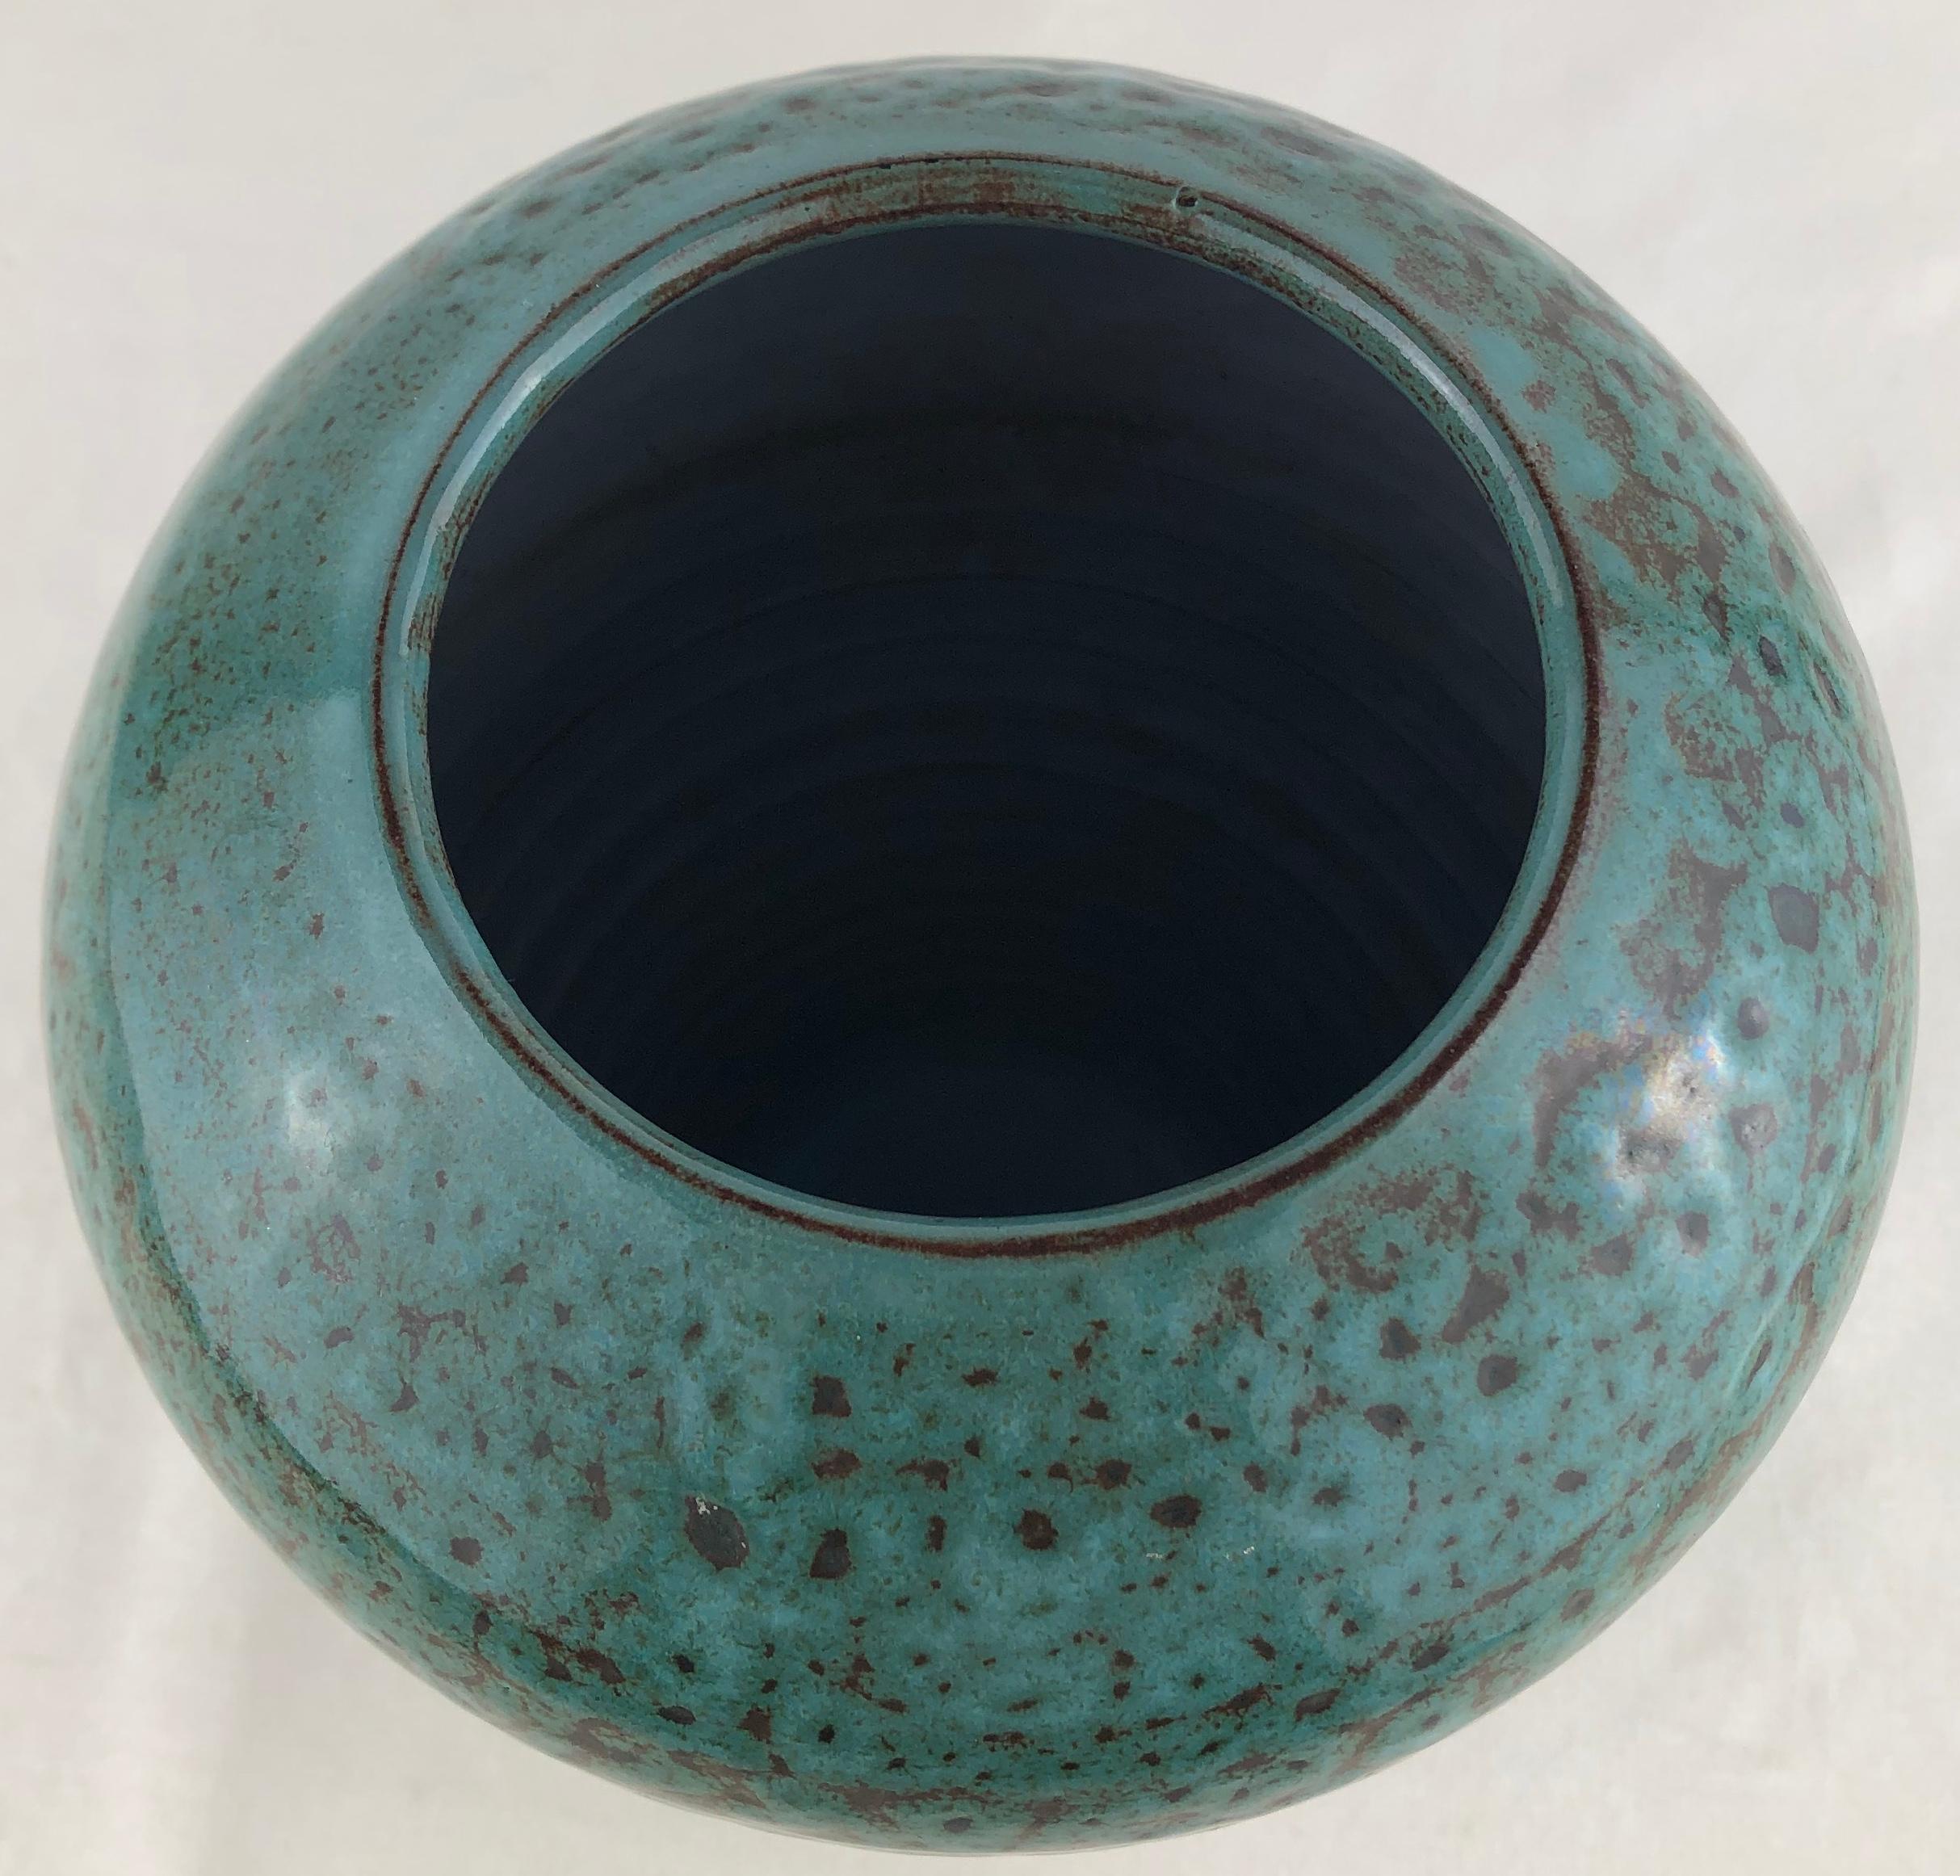 Midcentury French ceramic vase in a stunning turquoise color. 
Handcrafted and beautifully glazed. This is a signed piece, however, we have not been able to identify the name of the ceramic artist. Made in the style of Accolay ceramics, Accolay was